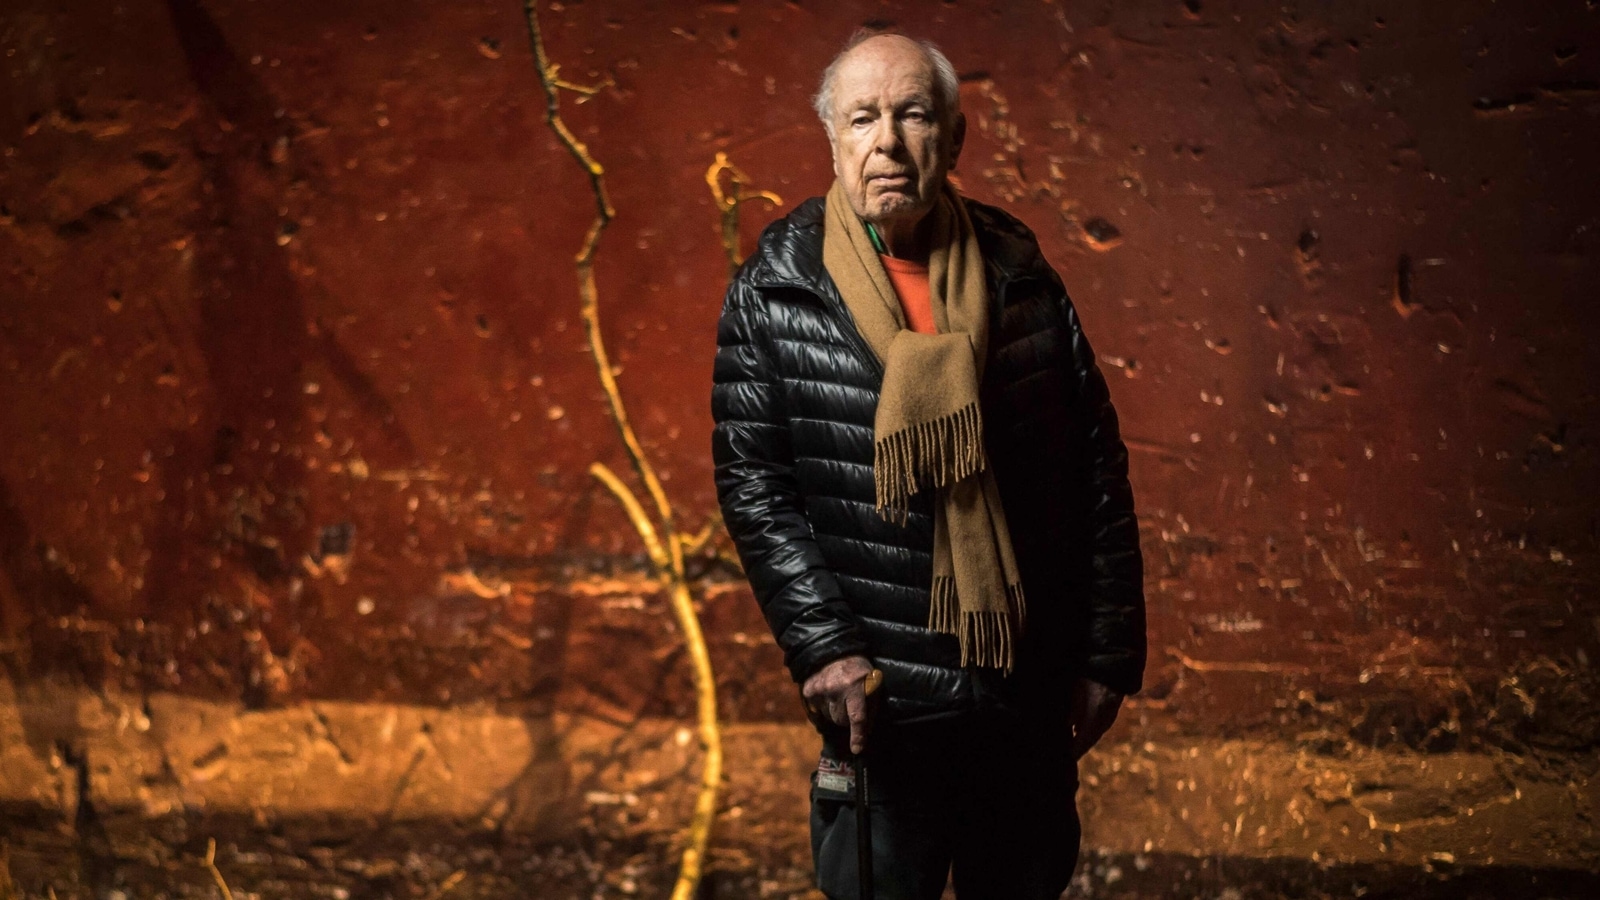 Theatre and film director Peter Brook, known for The Mahabharata and Lord of the Flies, dies at 97